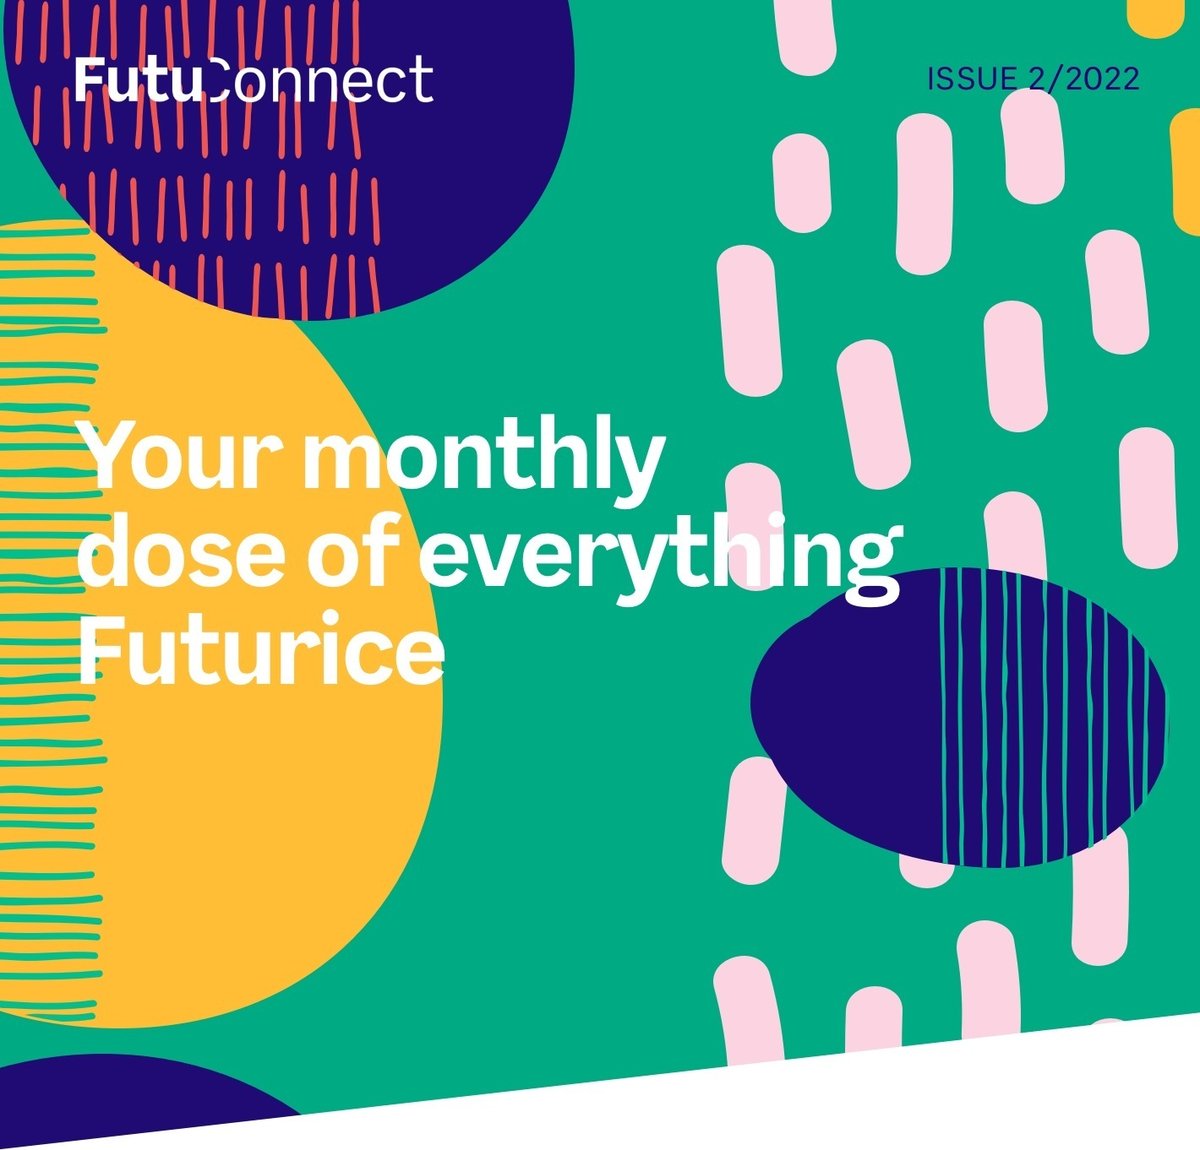 FutuConnect Newsletter Issue 2/2022